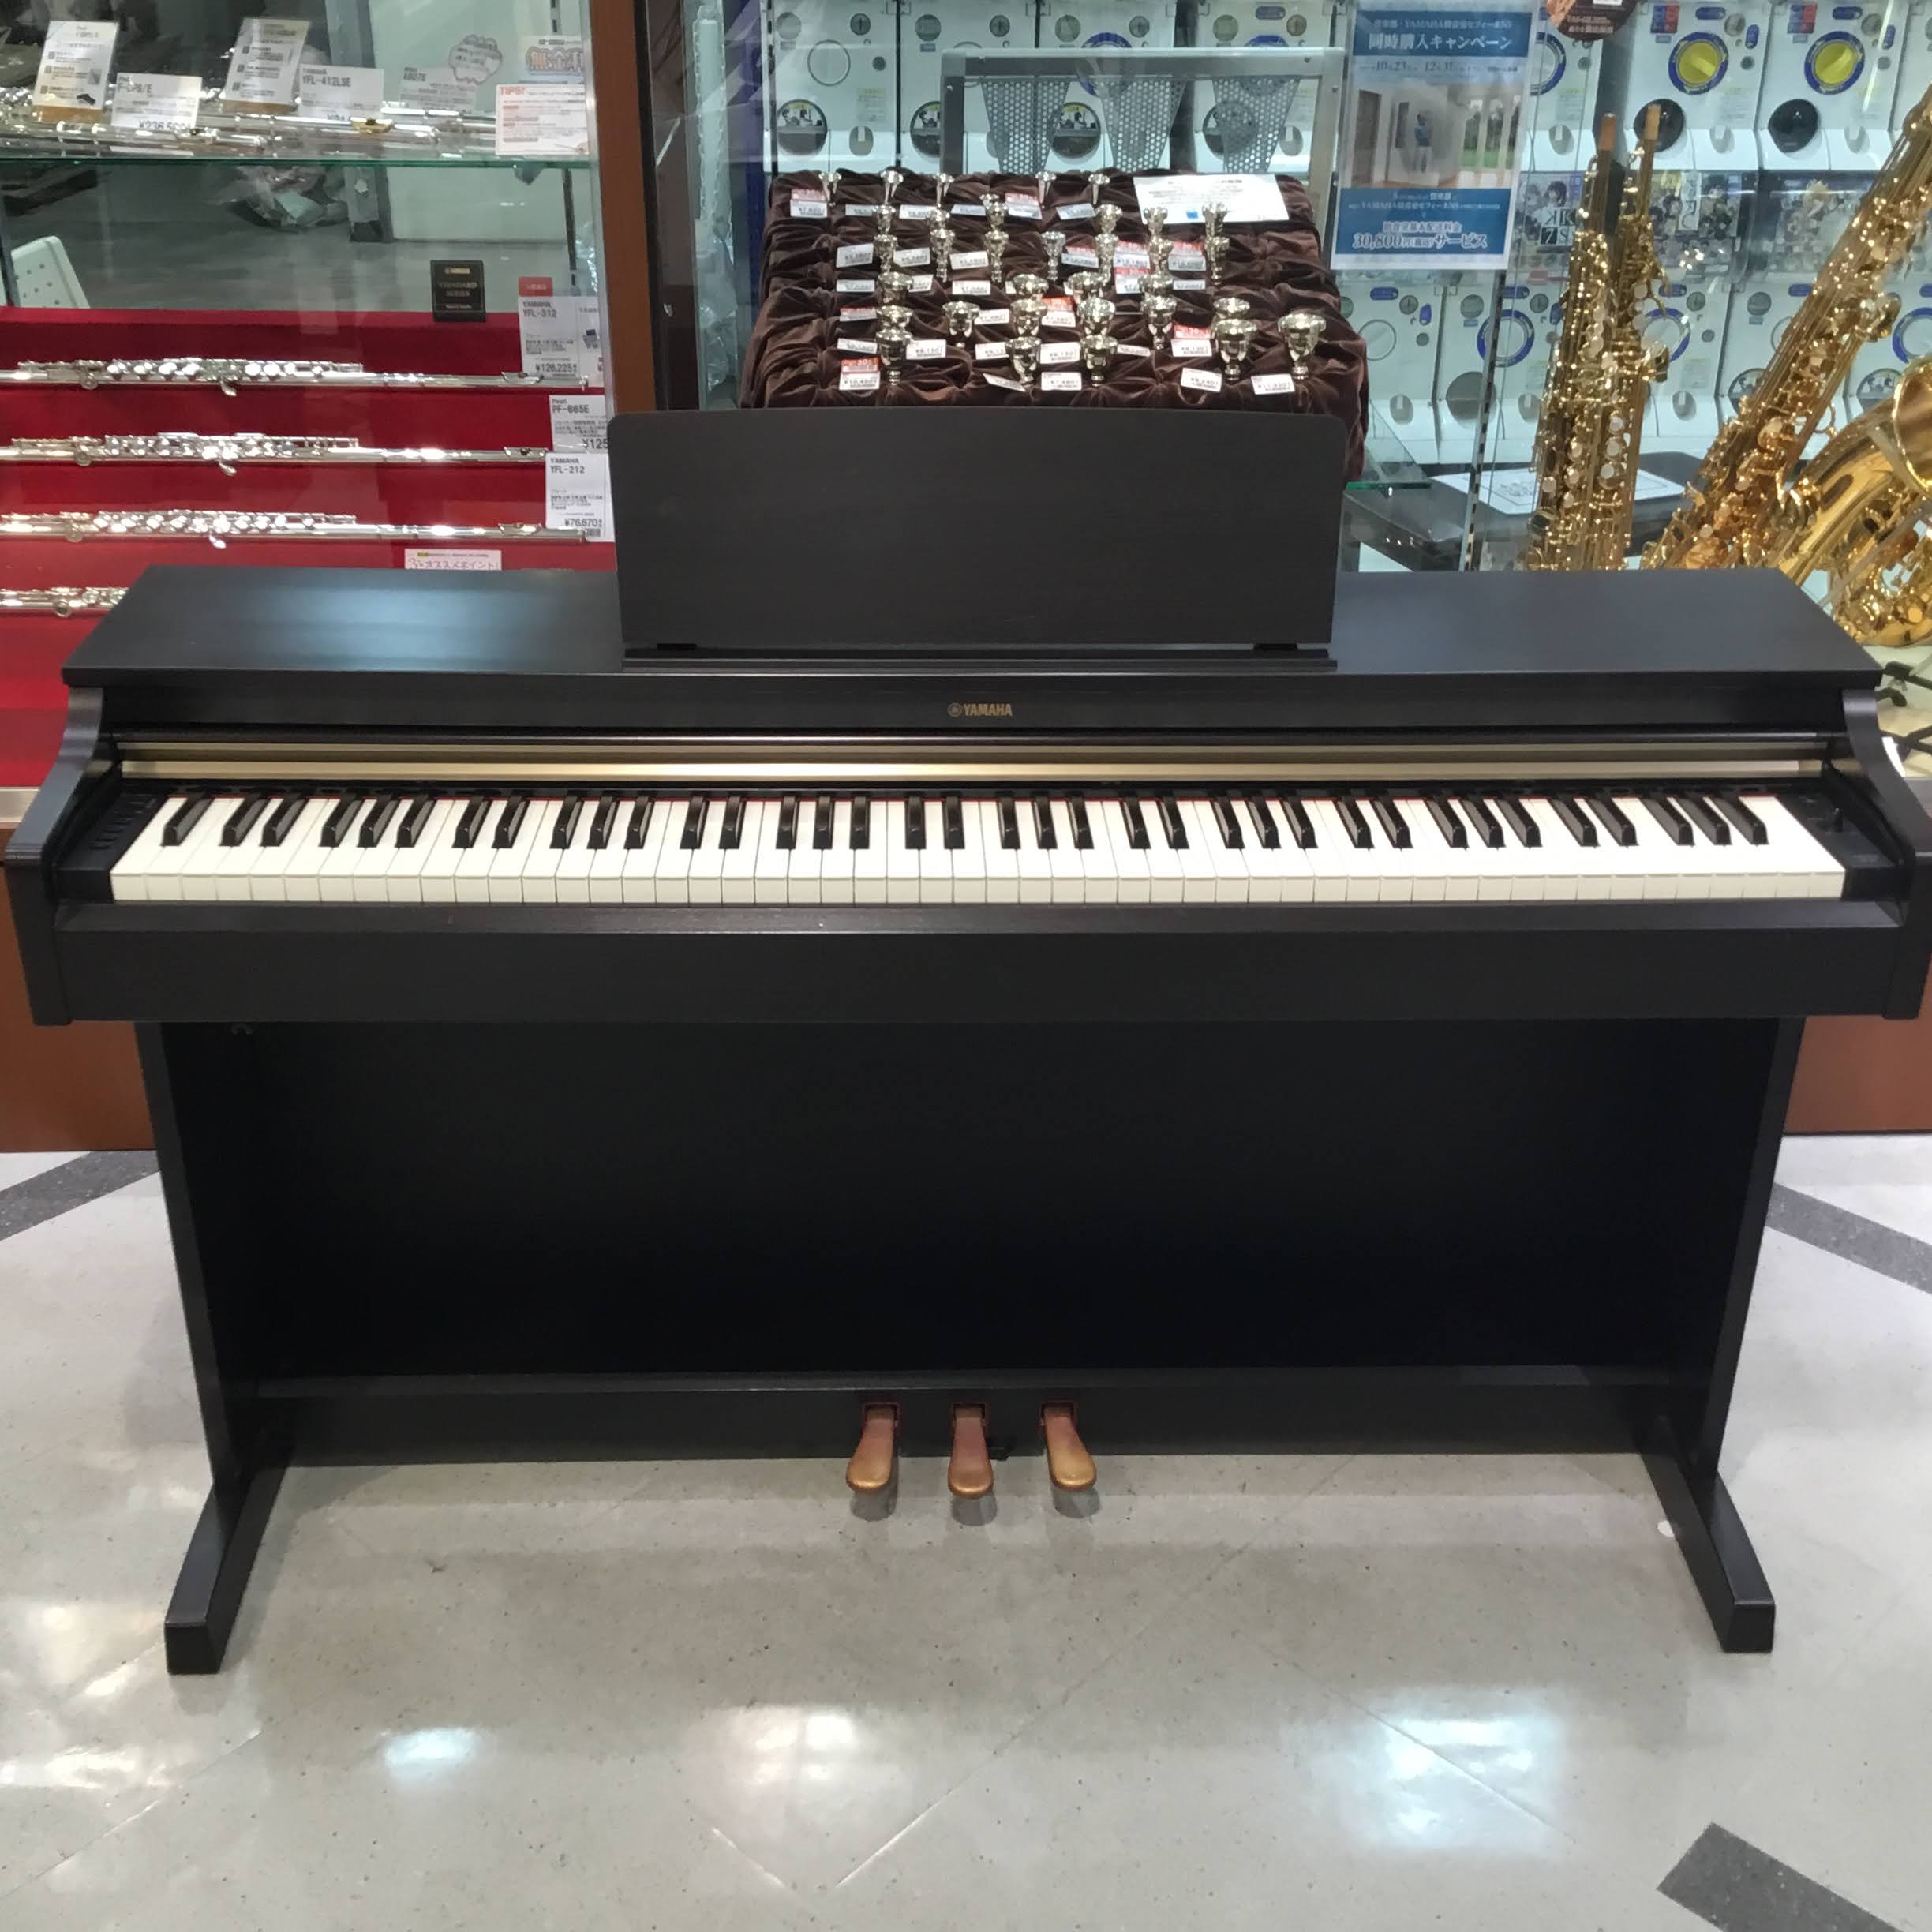 SOLD OUT】YAMAHA YDP-162R/2014年製｜島村楽器 水戸マイム店